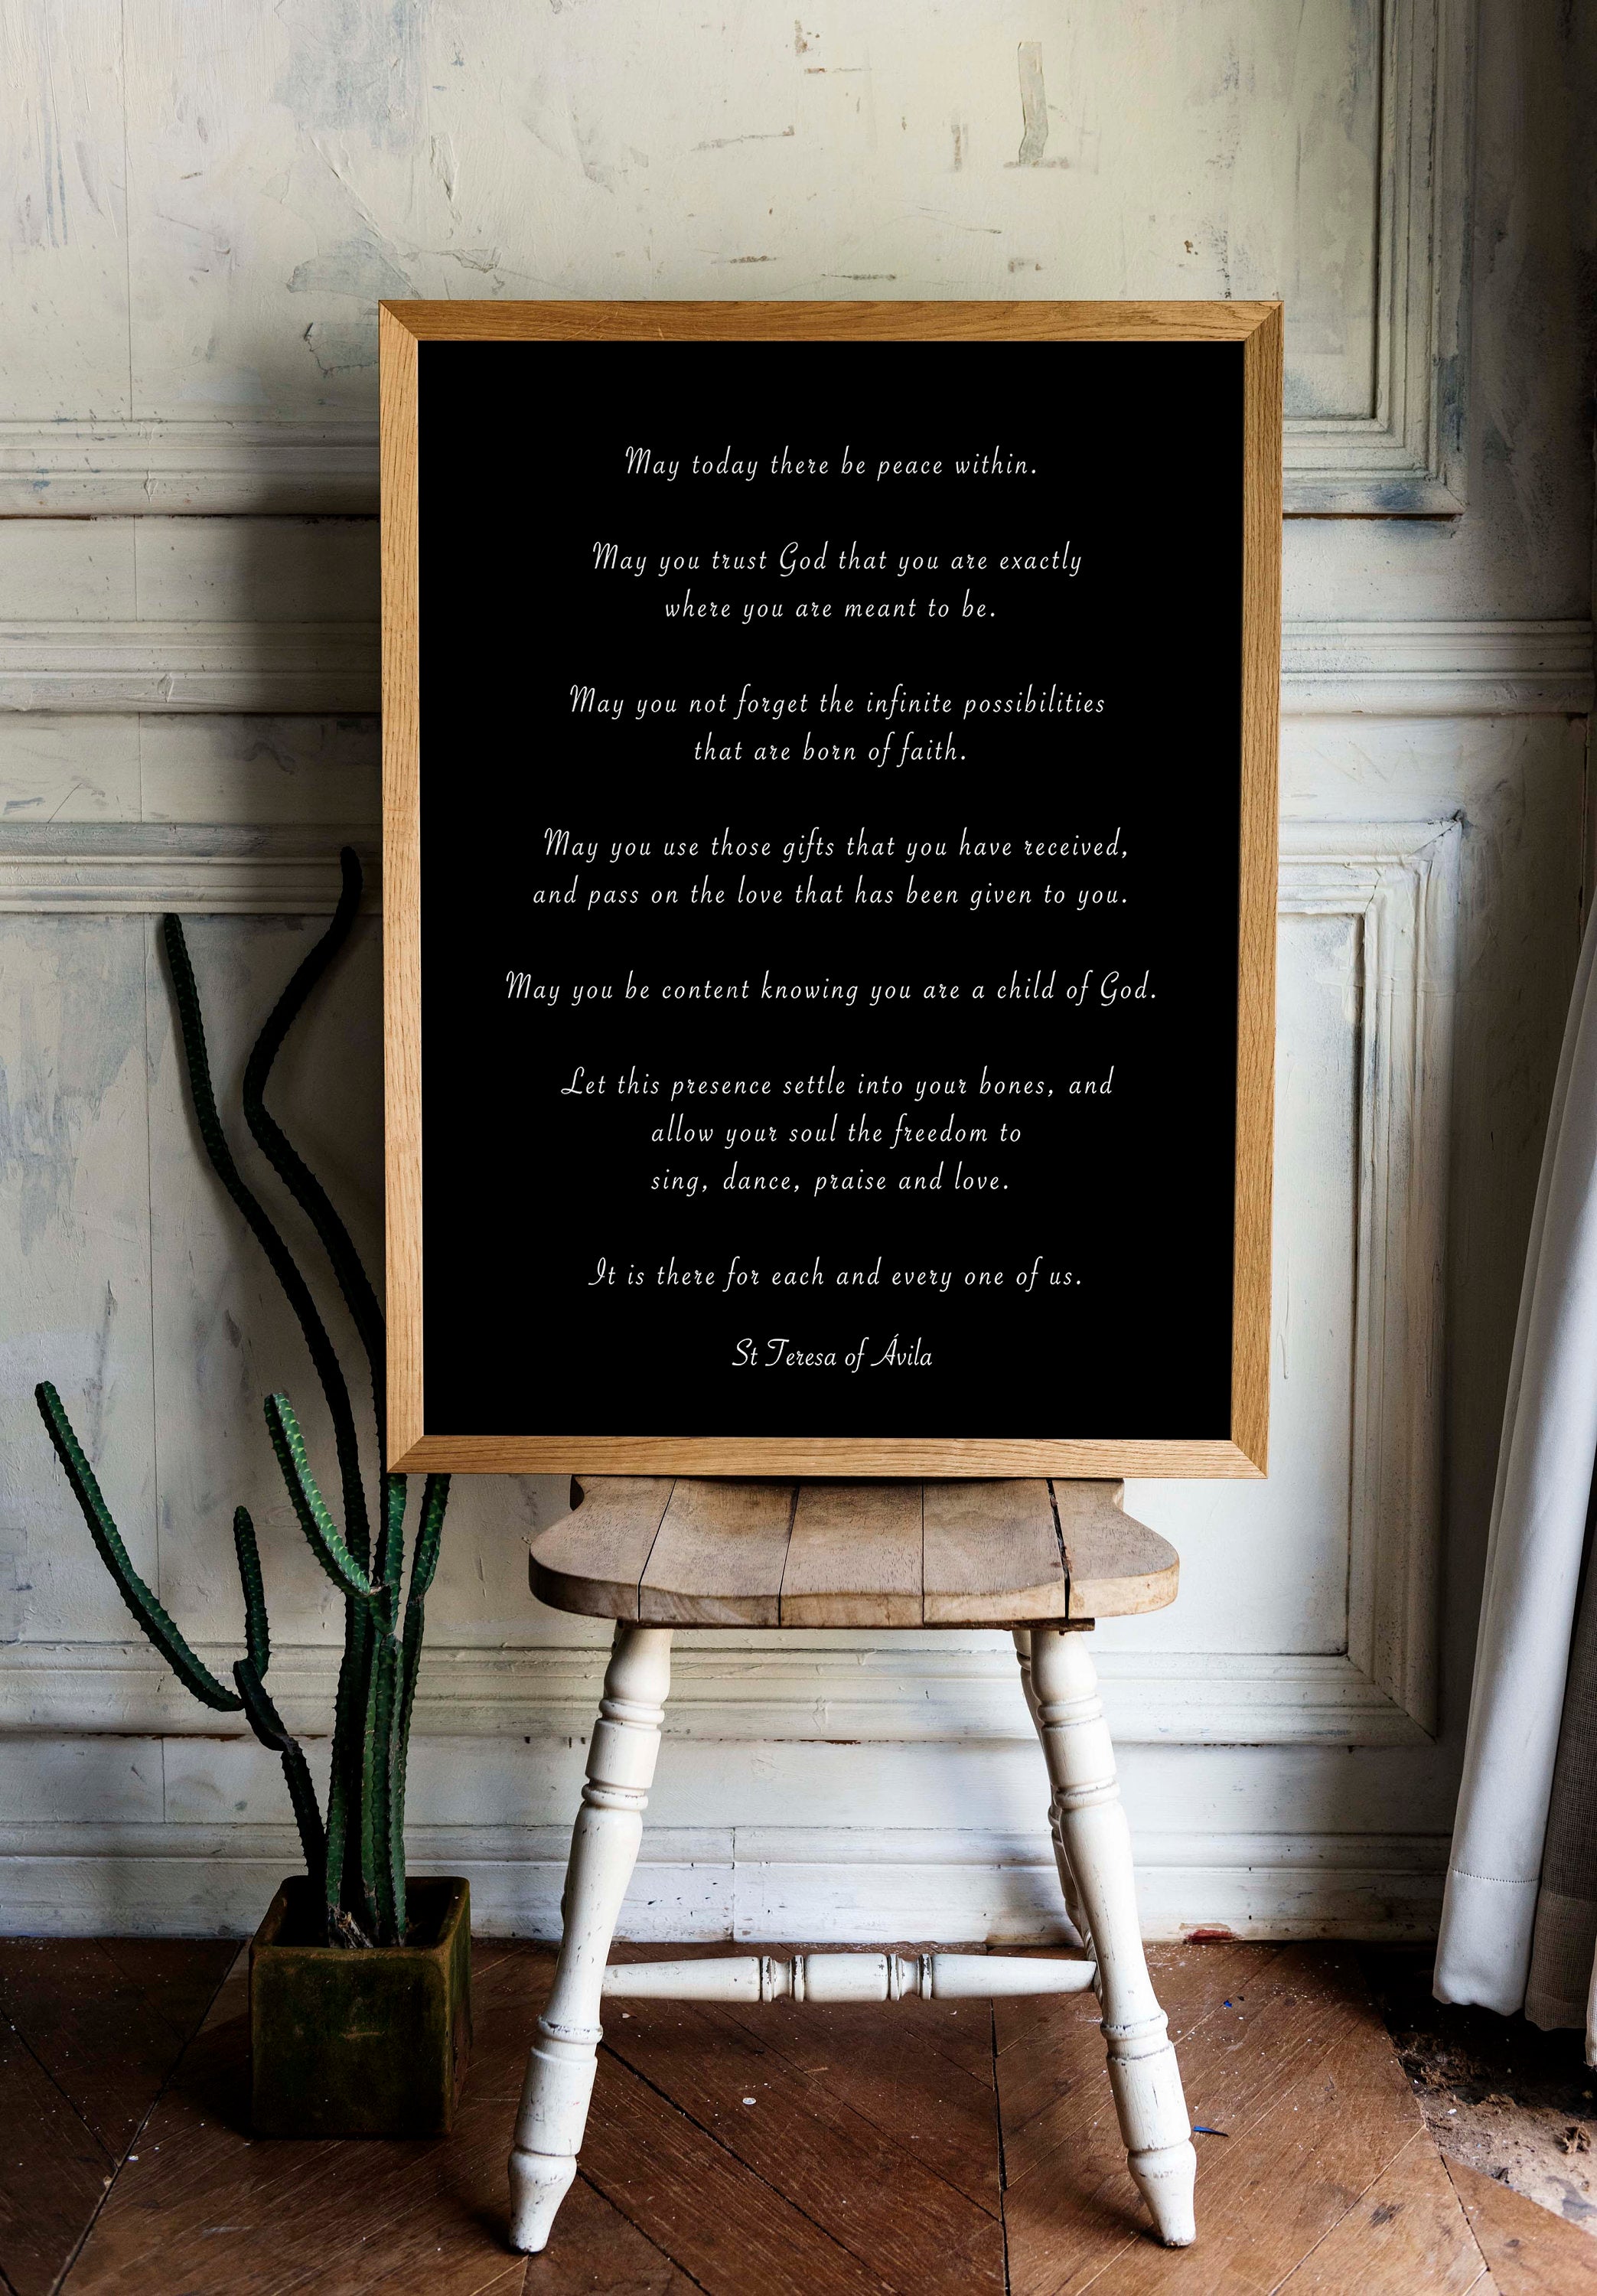 St. Teresa Of Avila Peace Quote Print in Black & White, May Today There Be Peace Within Inspirational Quote Wall Art Print